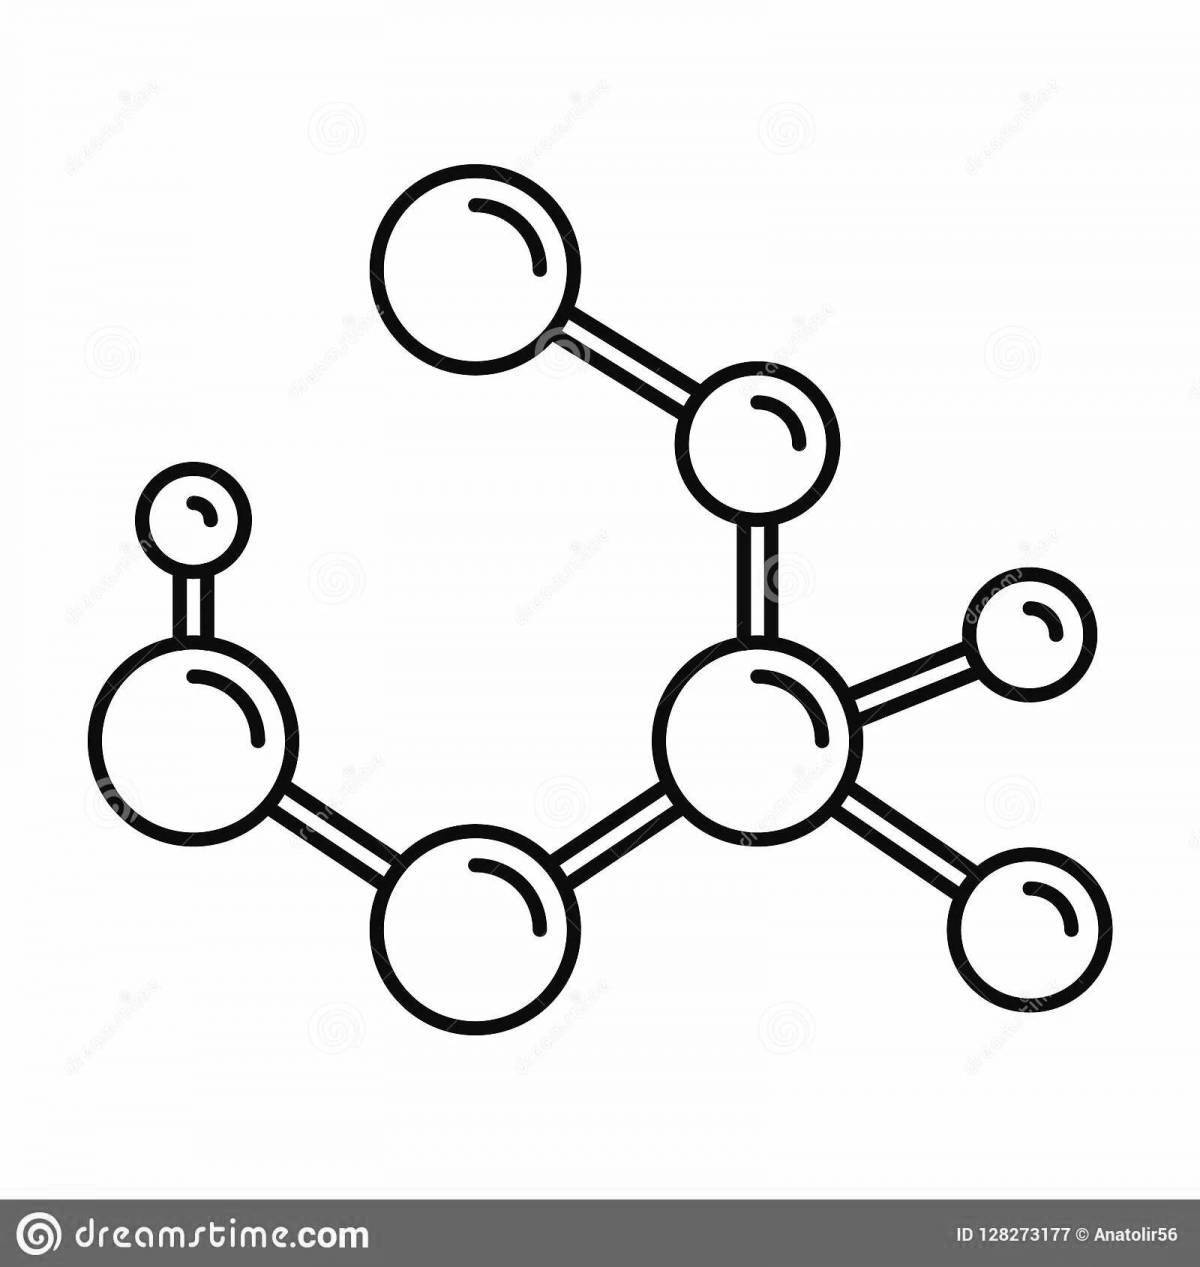 Exciting water molecule coloring page